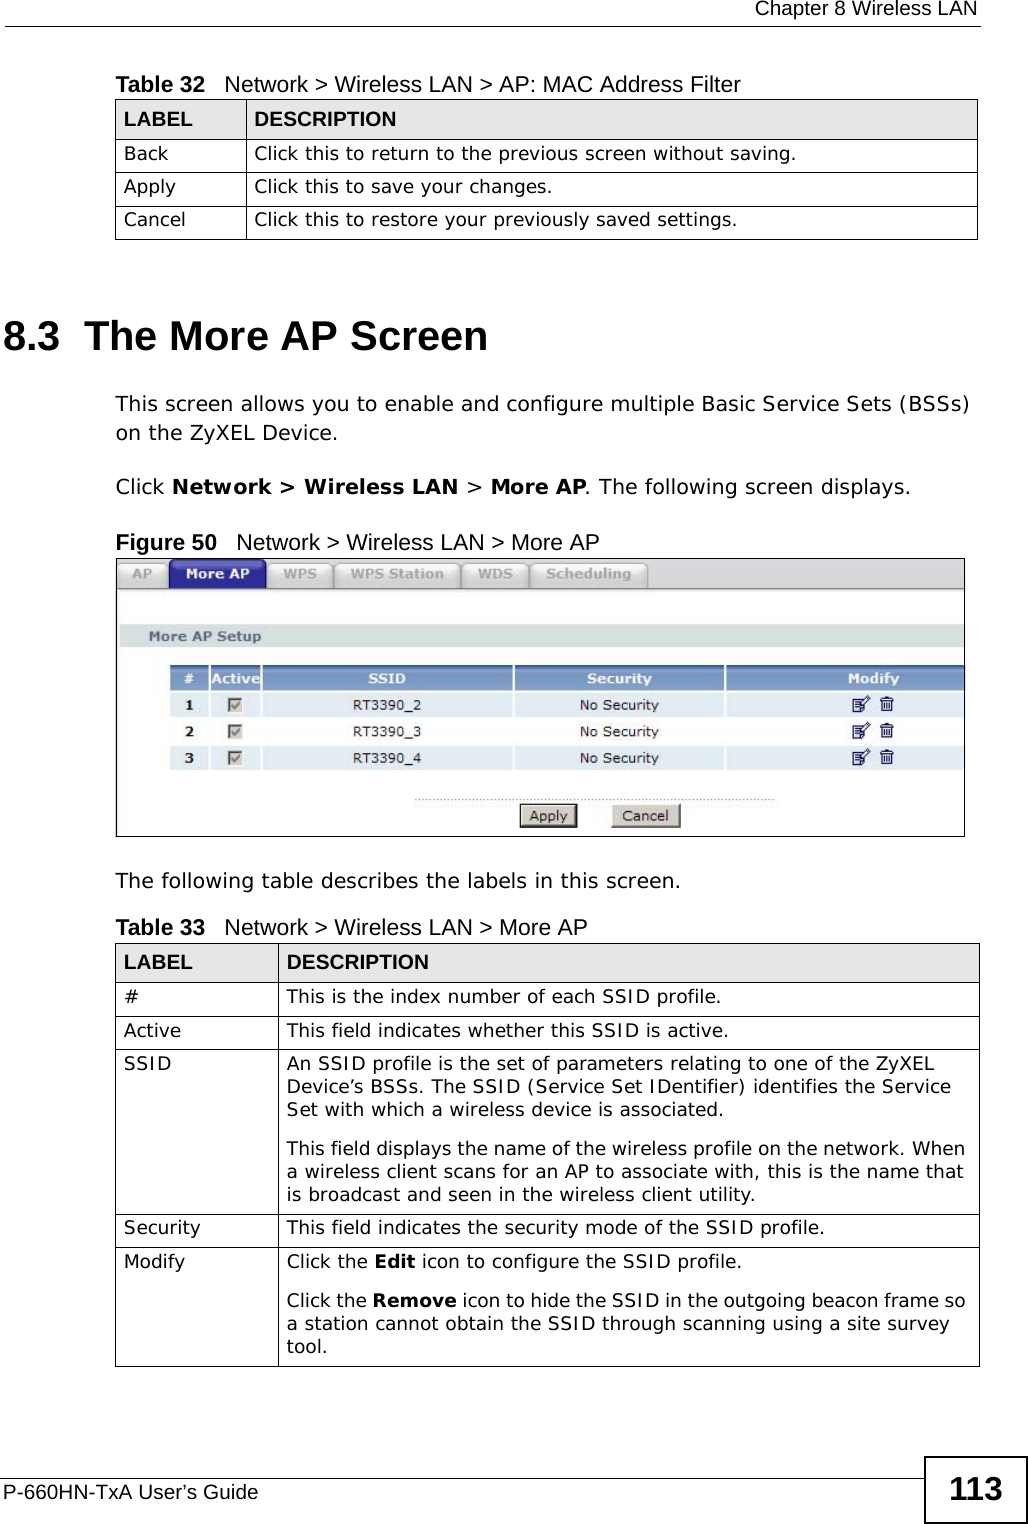  Chapter 8 Wireless LANP-660HN-TxA User’s Guide 1138.3  The More AP ScreenThis screen allows you to enable and configure multiple Basic Service Sets (BSSs) on the ZyXEL Device.Click Network &gt; Wireless LAN &gt; More AP. The following screen displays.Figure 50   Network &gt; Wireless LAN &gt; More APThe following table describes the labels in this screen.Back Click this to return to the previous screen without saving.Apply Click this to save your changes.Cancel Click this to restore your previously saved settings.Table 32   Network &gt; Wireless LAN &gt; AP: MAC Address FilterLABEL DESCRIPTIONTable 33   Network &gt; Wireless LAN &gt; More APLABEL DESCRIPTION# This is the index number of each SSID profile. Active This field indicates whether this SSID is active. SSID An SSID profile is the set of parameters relating to one of the ZyXEL Device’s BSSs. The SSID (Service Set IDentifier) identifies the Service Set with which a wireless device is associated. This field displays the name of the wireless profile on the network. When a wireless client scans for an AP to associate with, this is the name that is broadcast and seen in the wireless client utility.Security This field indicates the security mode of the SSID profile.Modify Click the Edit icon to configure the SSID profile.Click the Remove icon to hide the SSID in the outgoing beacon frame so a station cannot obtain the SSID through scanning using a site survey tool.